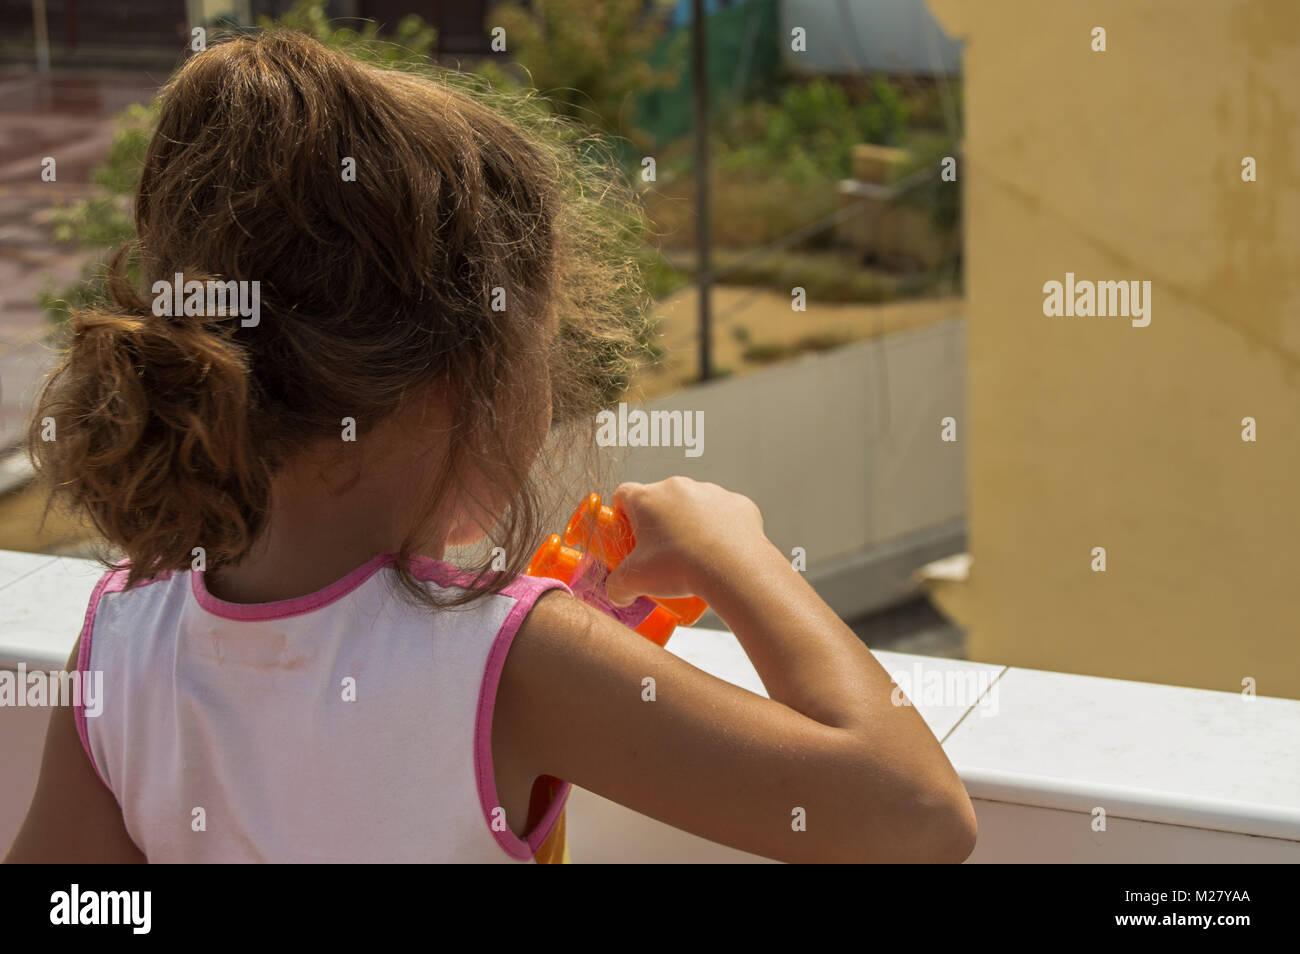 Little blond girl with curly hair playing with toy prismatic from the roof of a house on a sunny day. Stock Photo